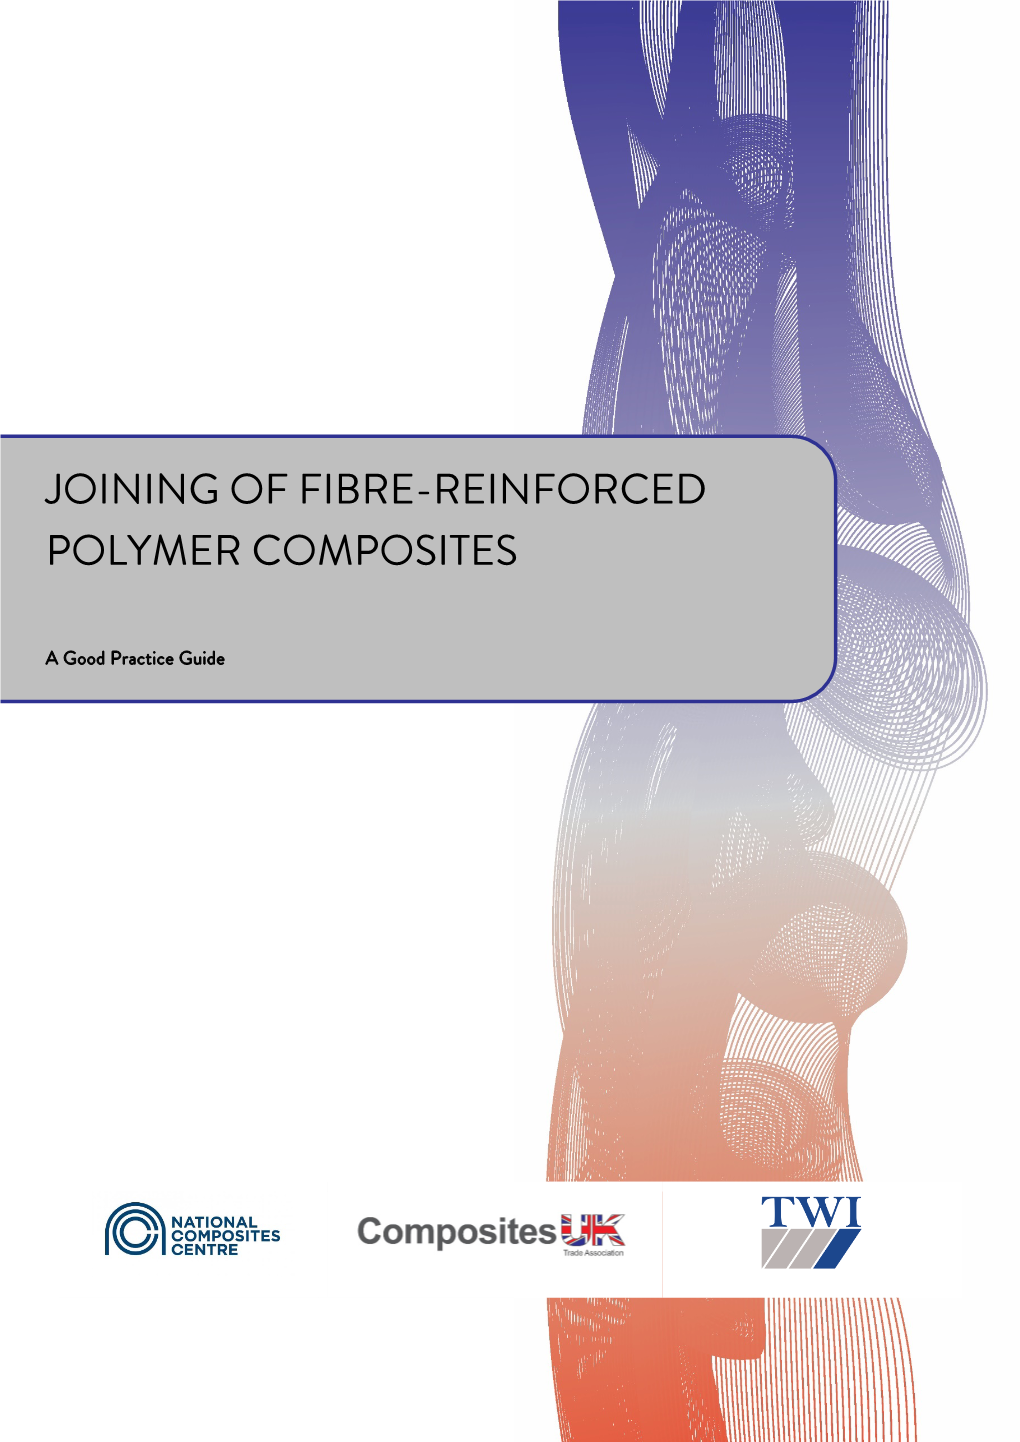 Joining of Fibre-Reinforced Polymer Composites